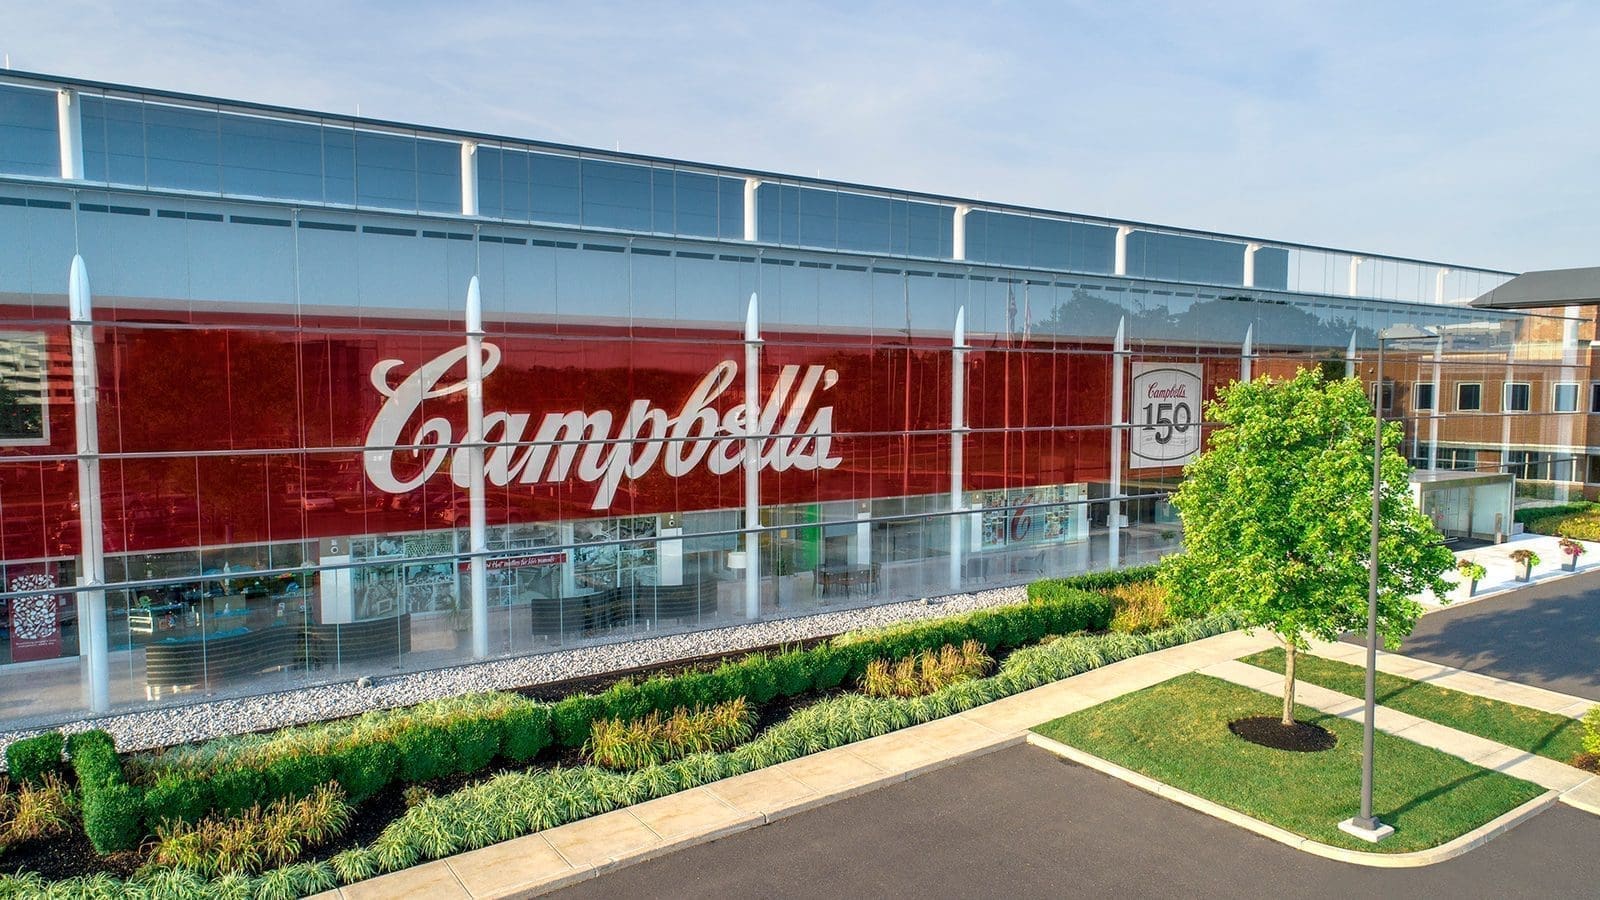 Campbell Soup invests US$50m in consolidating snacking operations and expanding team